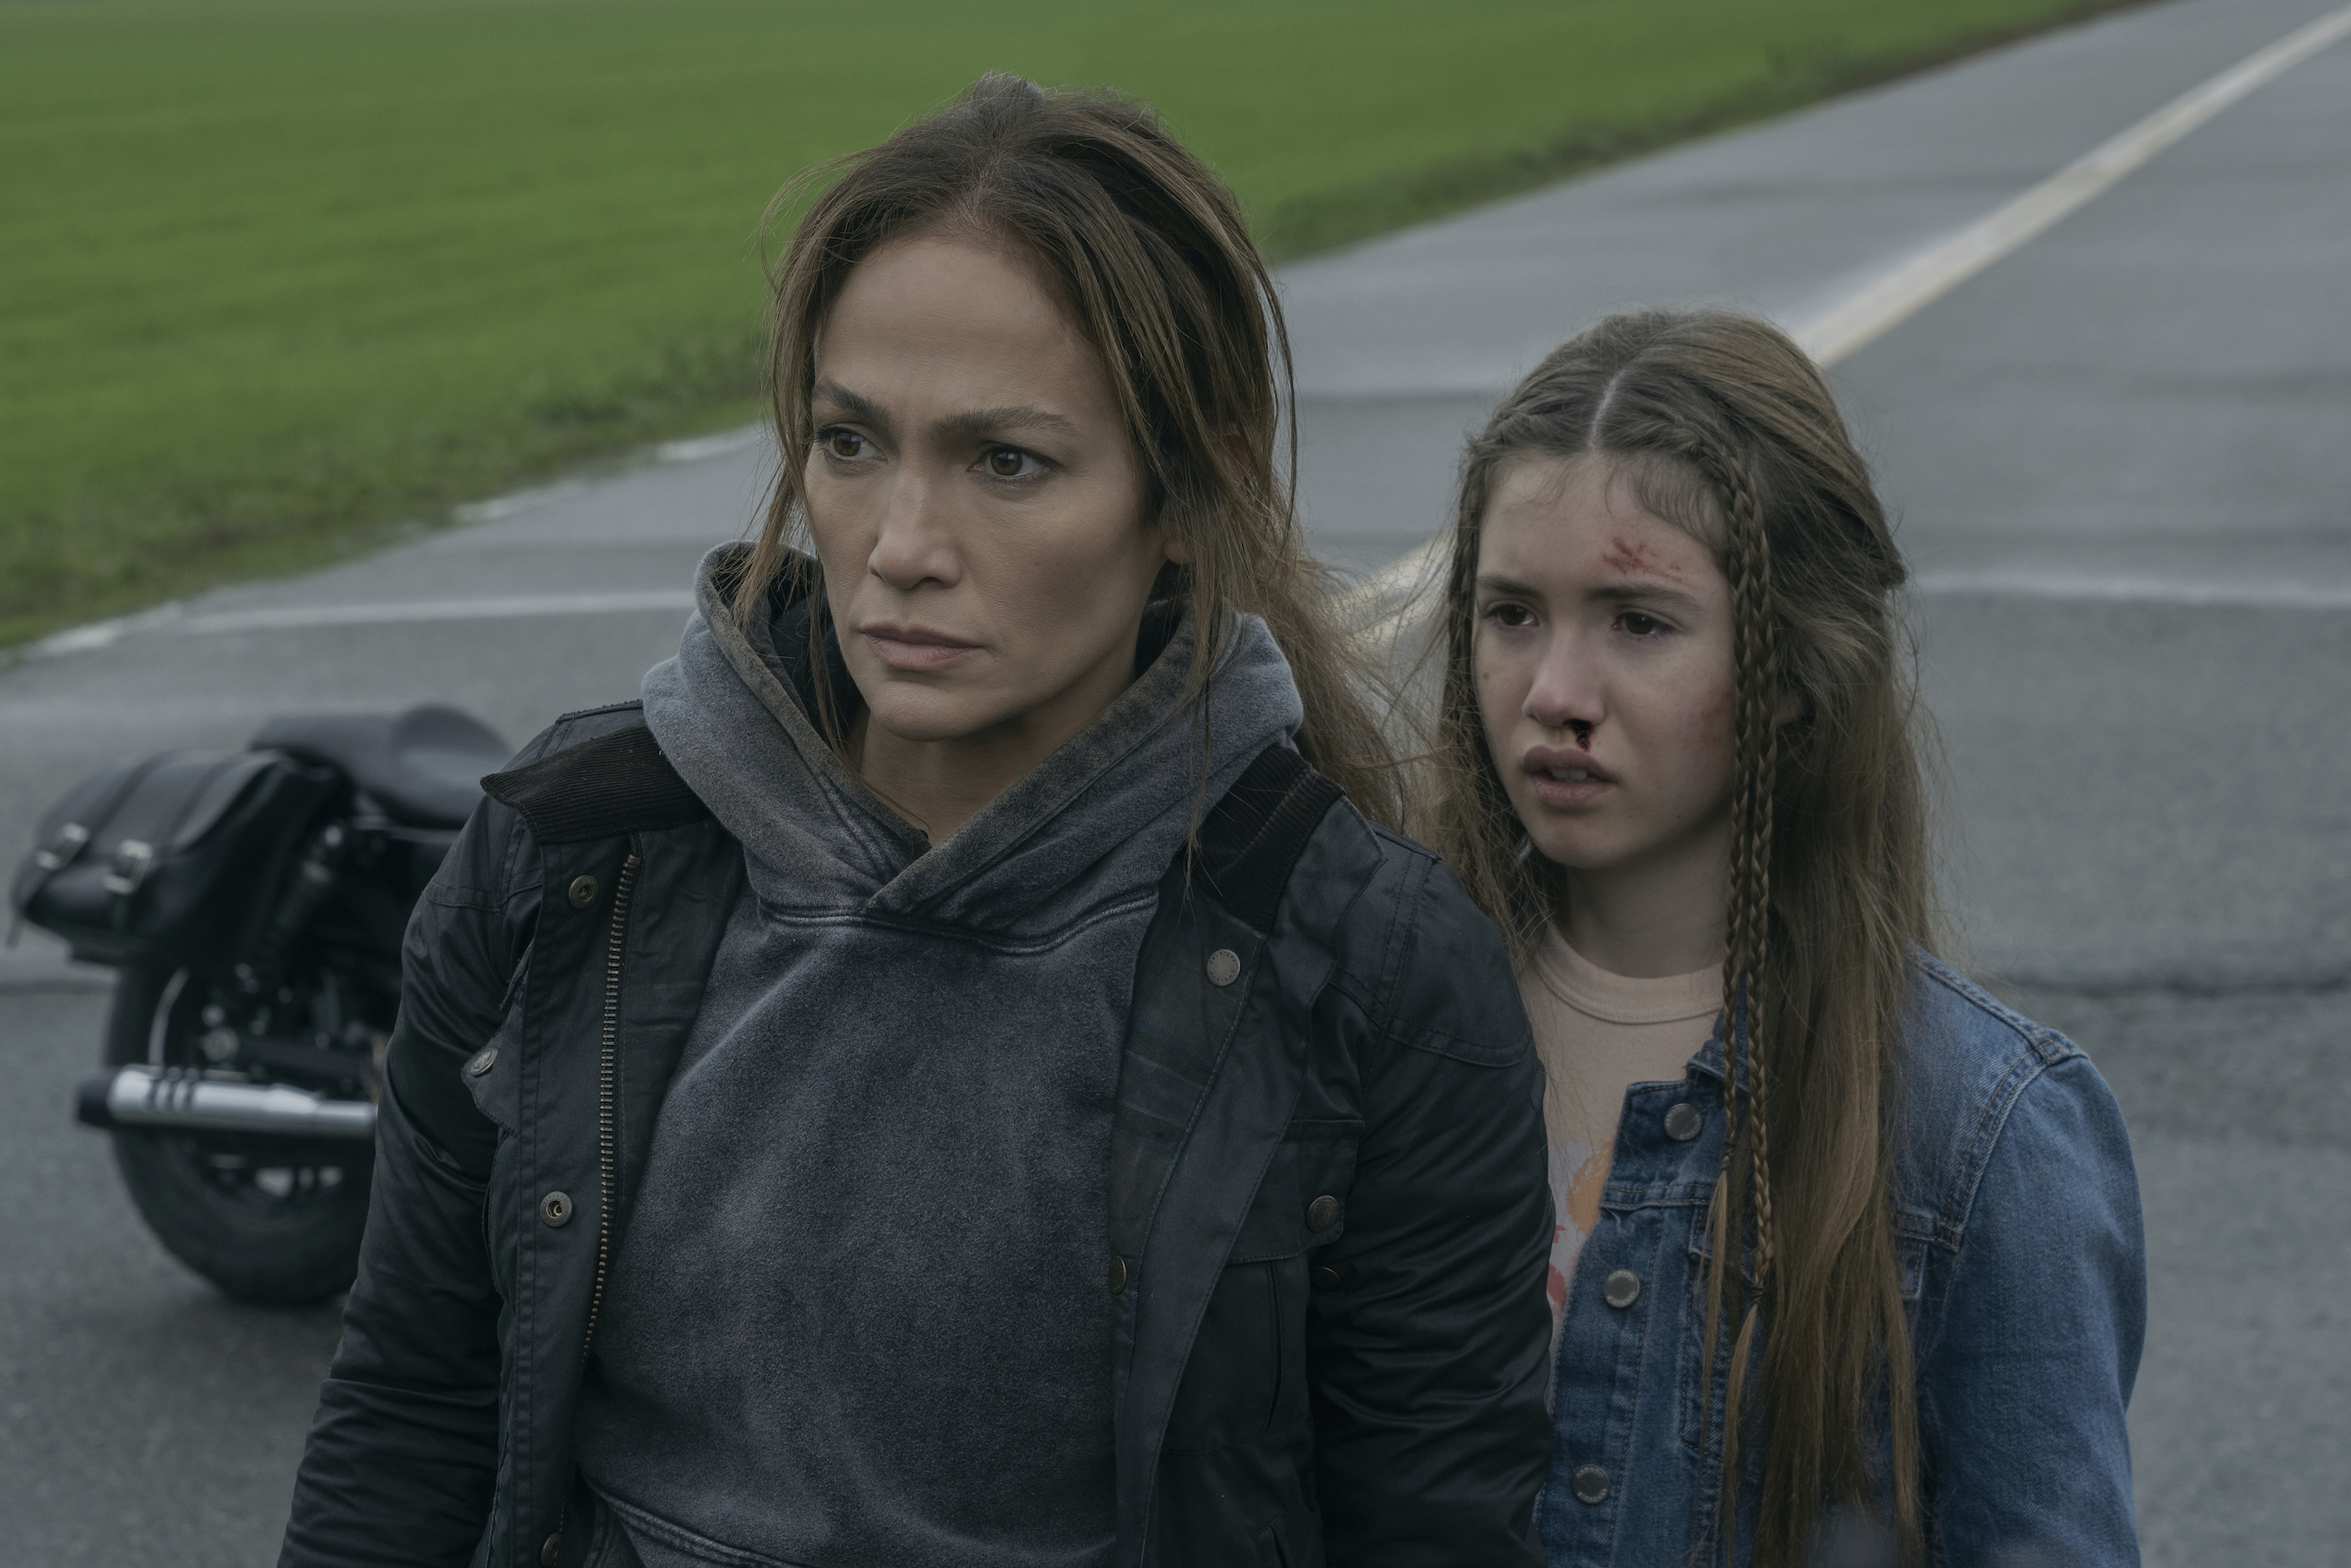 The Mother. (L to R) Jennifer Lopez as The Mother, Lucy Paez as Zoe in The Mother. Cr. Doane Gregory/Netflix © 2023.